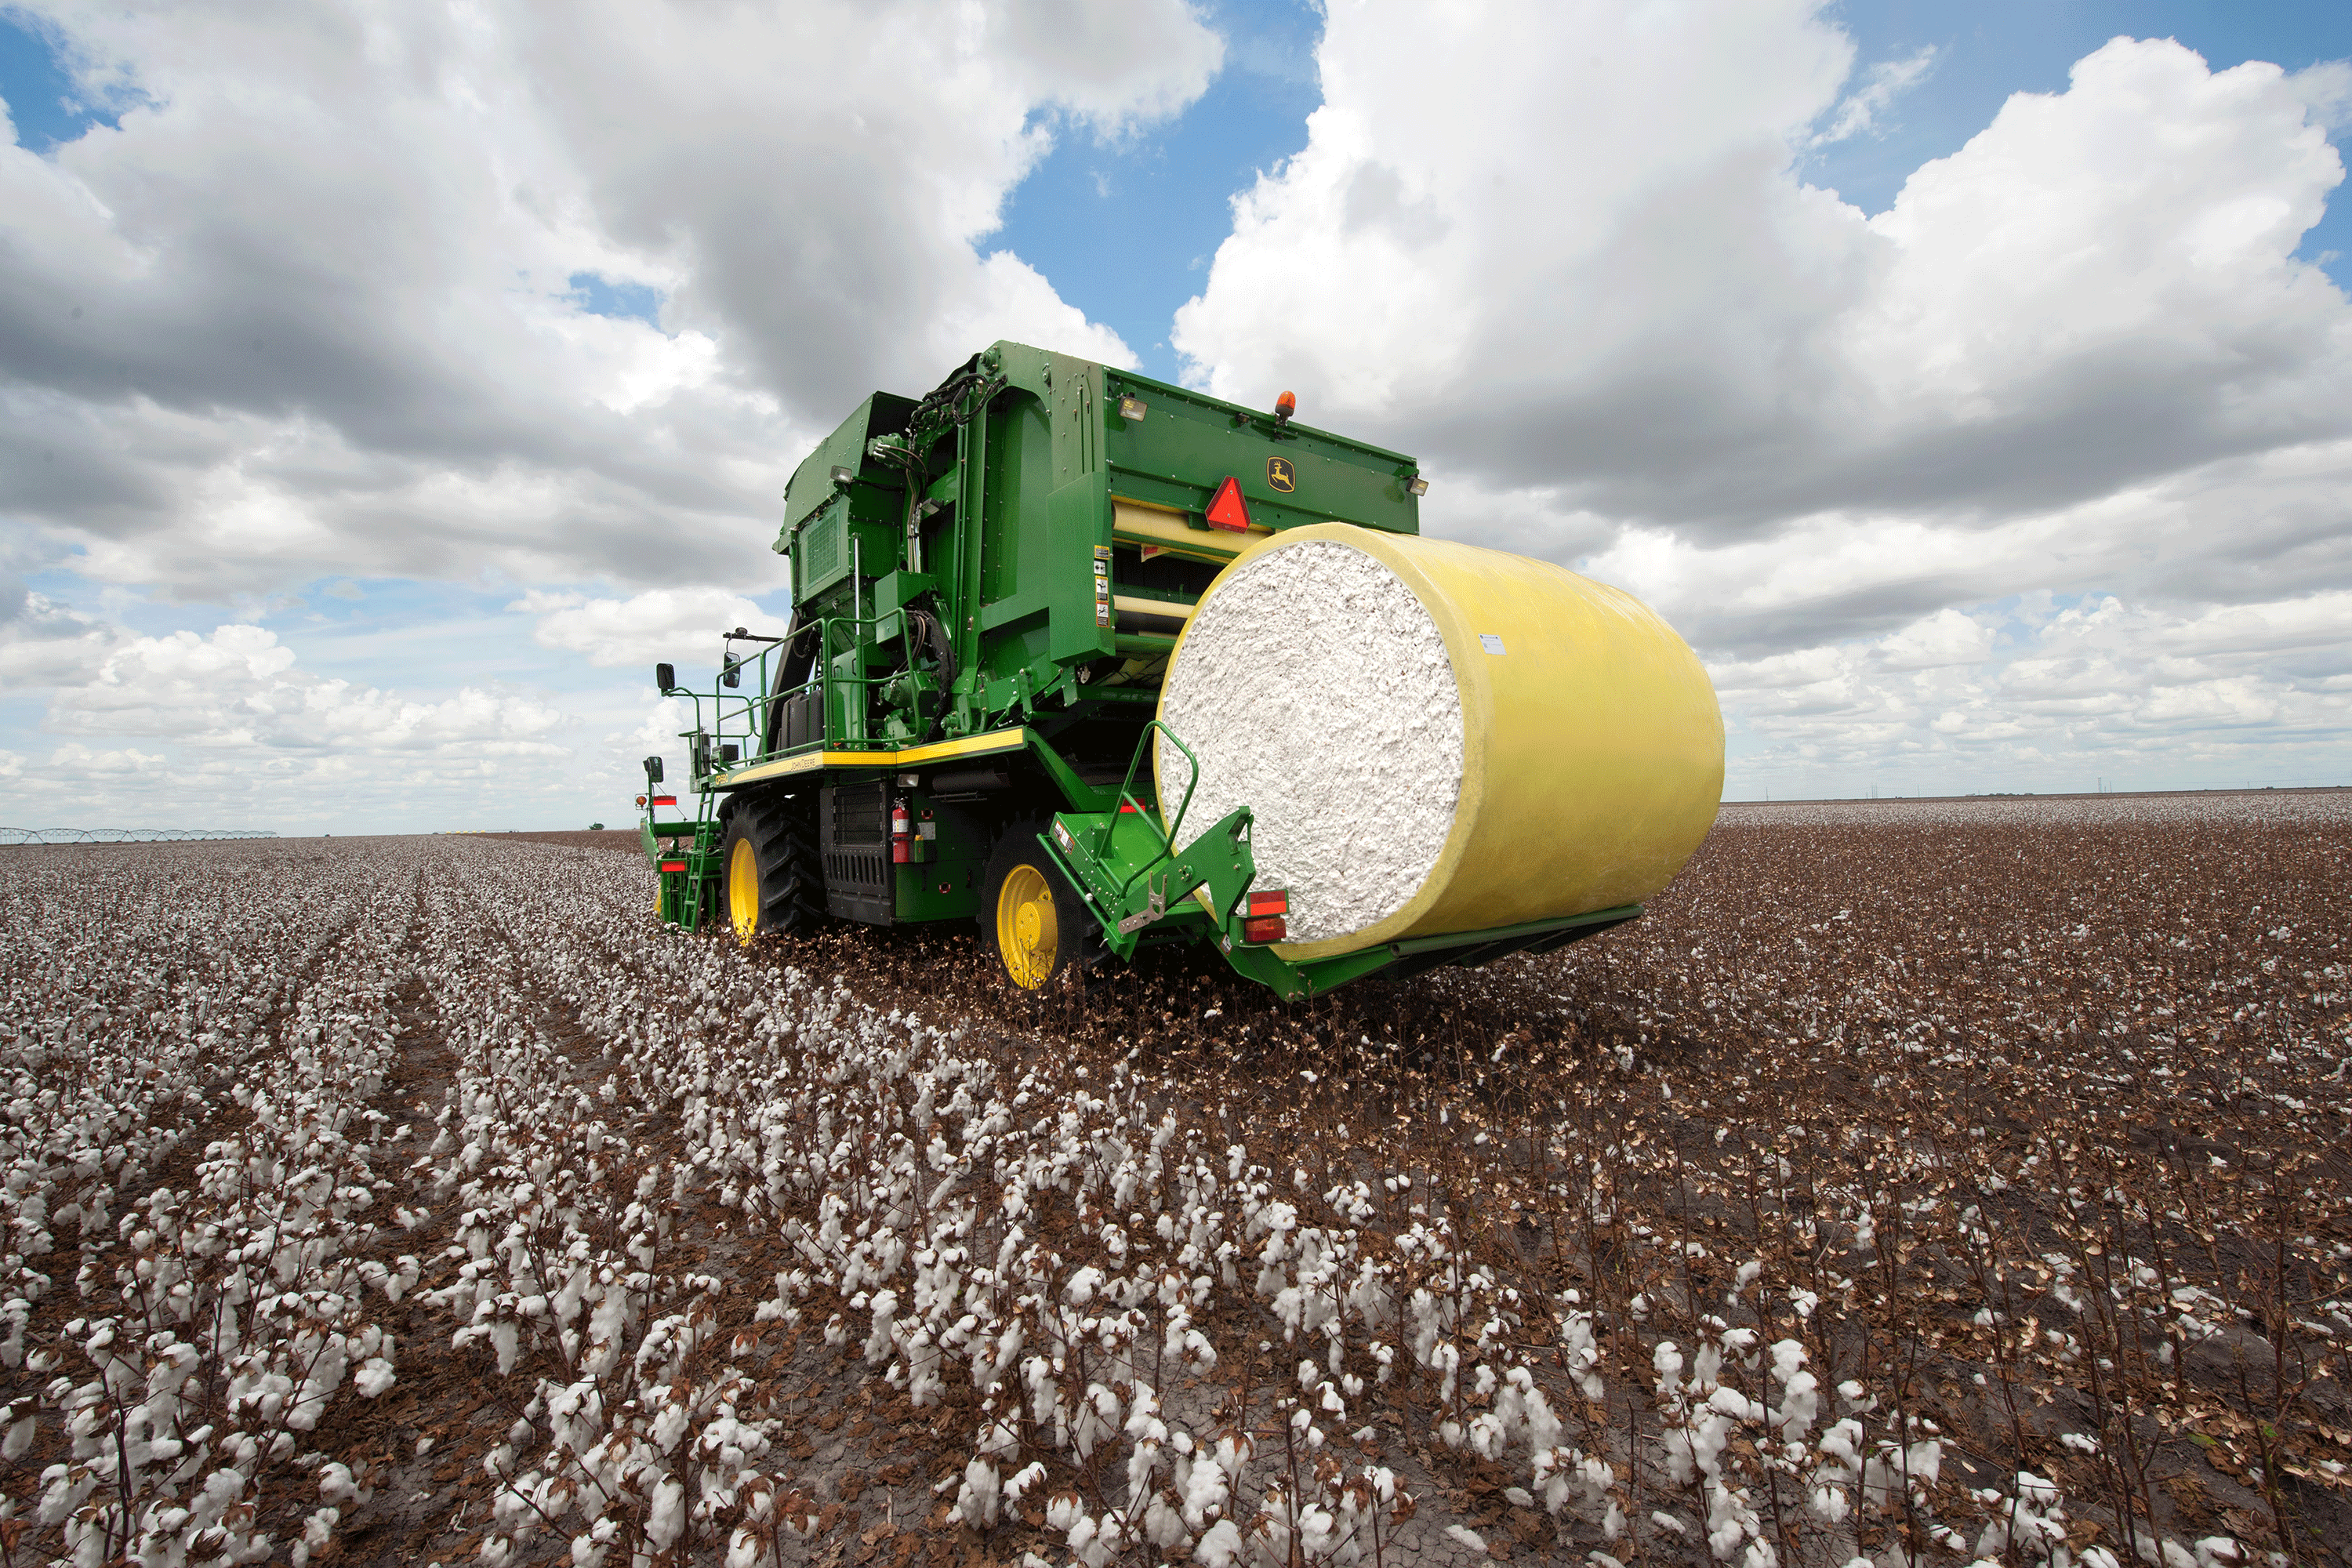 Oklahoma Cotton Crop Tops a Million Bales- Making Sooner State Fourth Largest Cotton Producing State in 2017